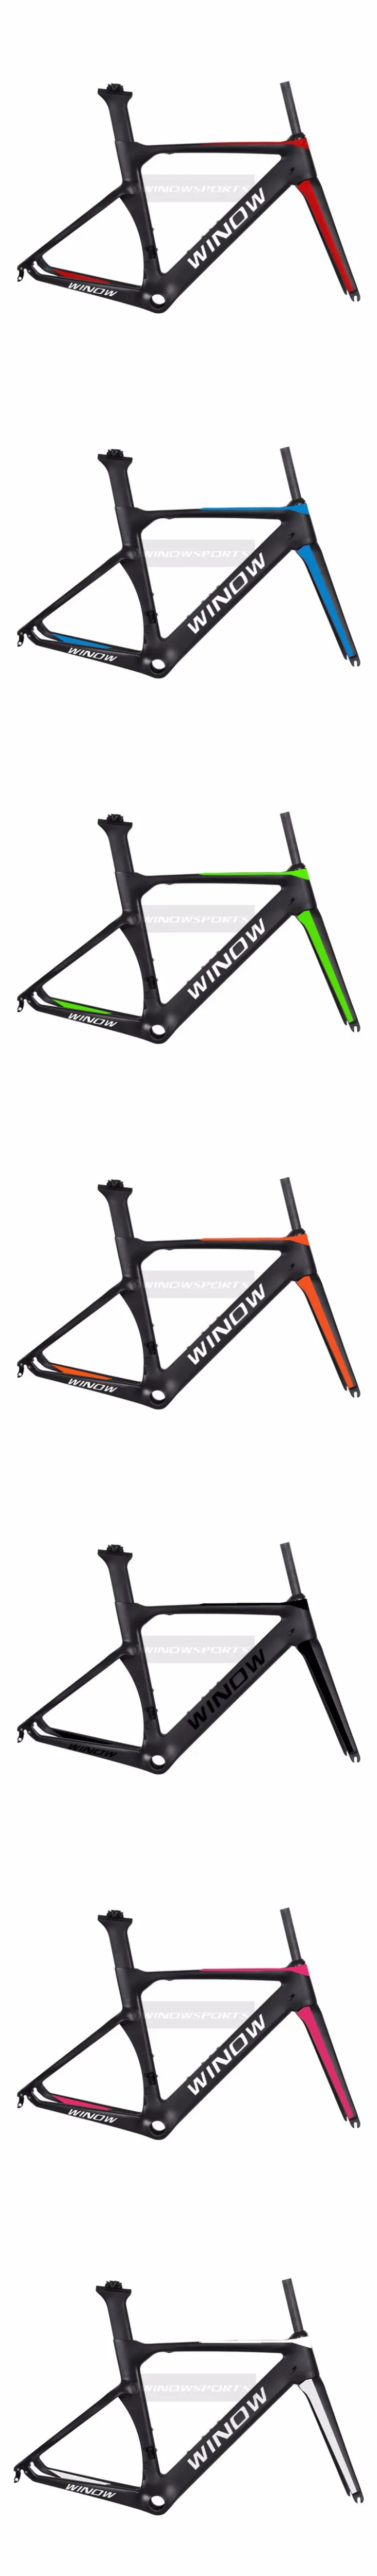 Sale 2018 Aero Design Carbon Road Frame Bicycle Carbon Racing Frame Road Frame packaging include frame+fork+seatpost+headset 8